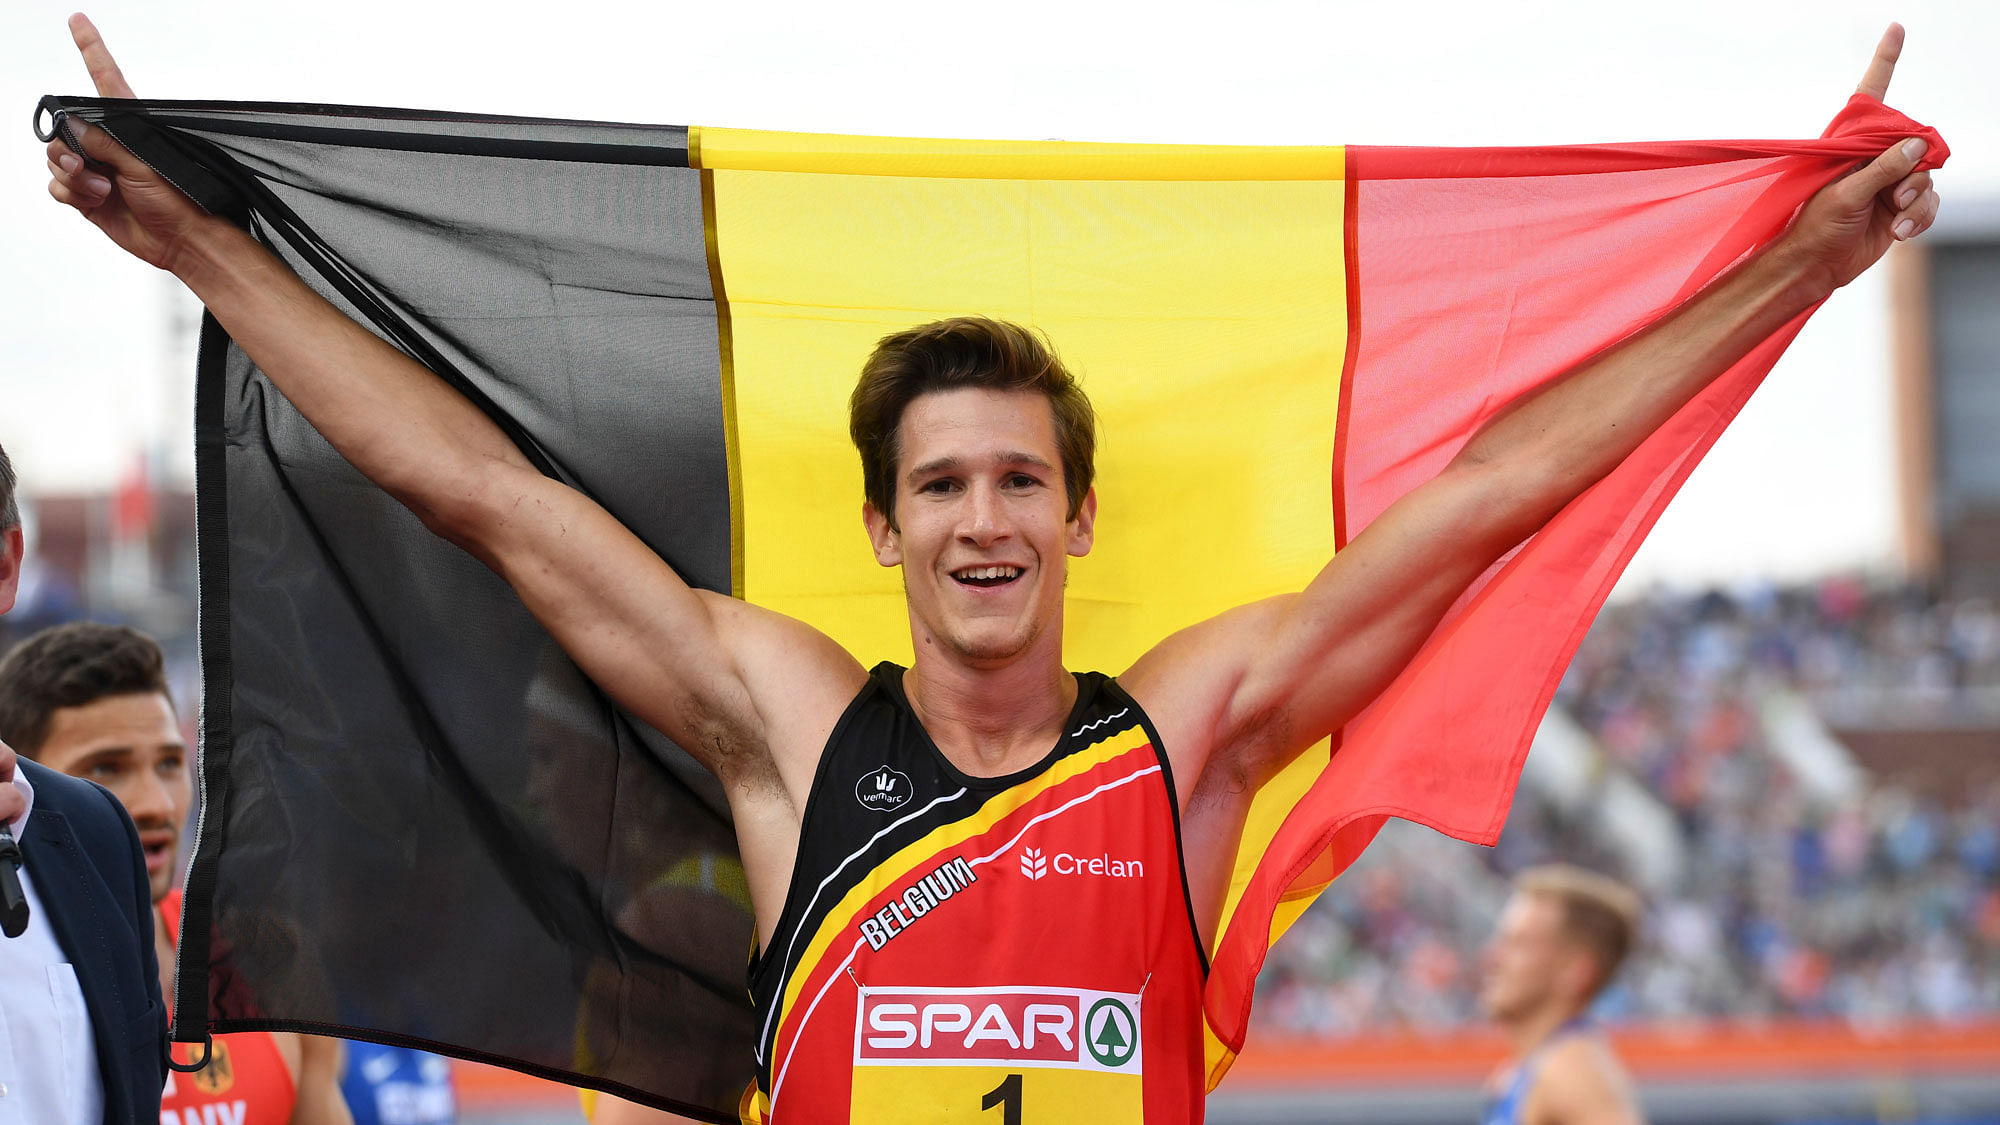 In this Thursday, July 7, 2016 photo, Belgium’s Thomas Van Der Plaetsen celebrates after winning the gold medal in the men’s Decathlon, at the European Athletics Championships in Amsterdam, the Netherlands.   (Photo: AP)